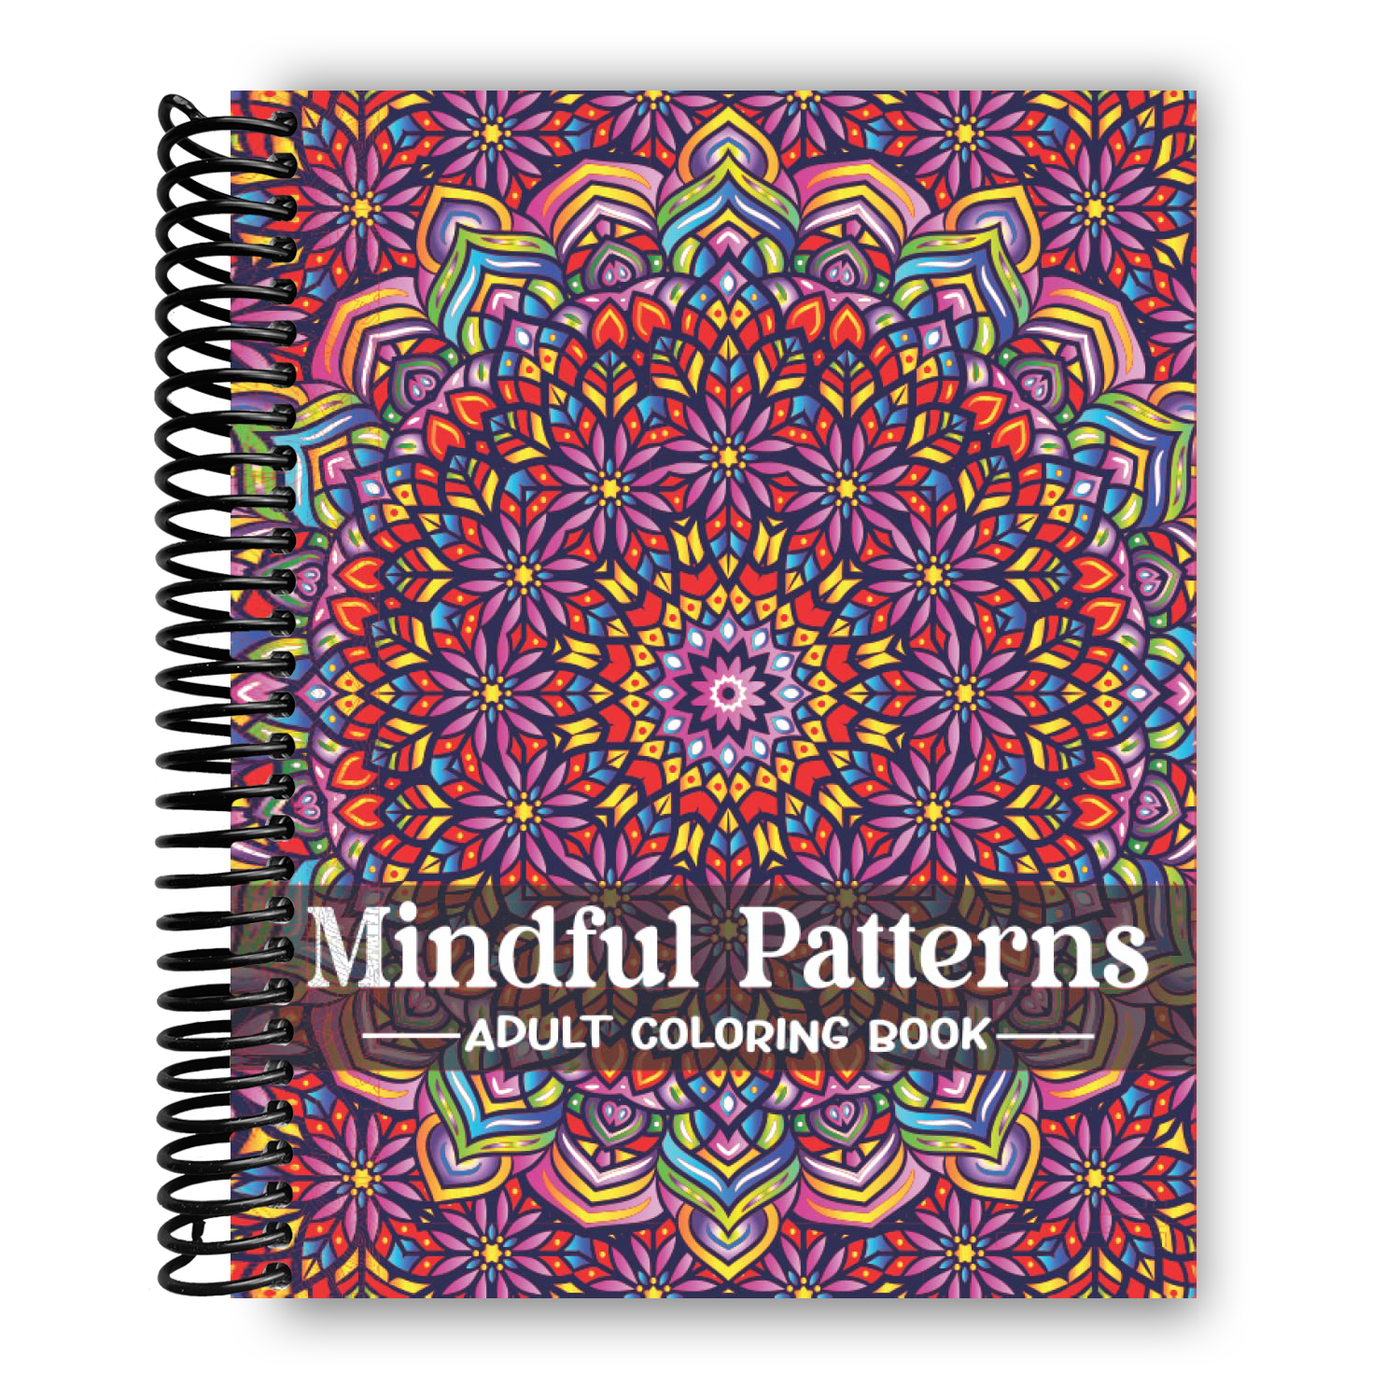 Mindful Patterns Adults Coloring Book: An Adult Coloring Book with Easy and Relieving Mindful Patterns Coloring Pages Prints for Stress Relief & ... Mandala Style Patterns Decorations to Color (Spiral Bound)